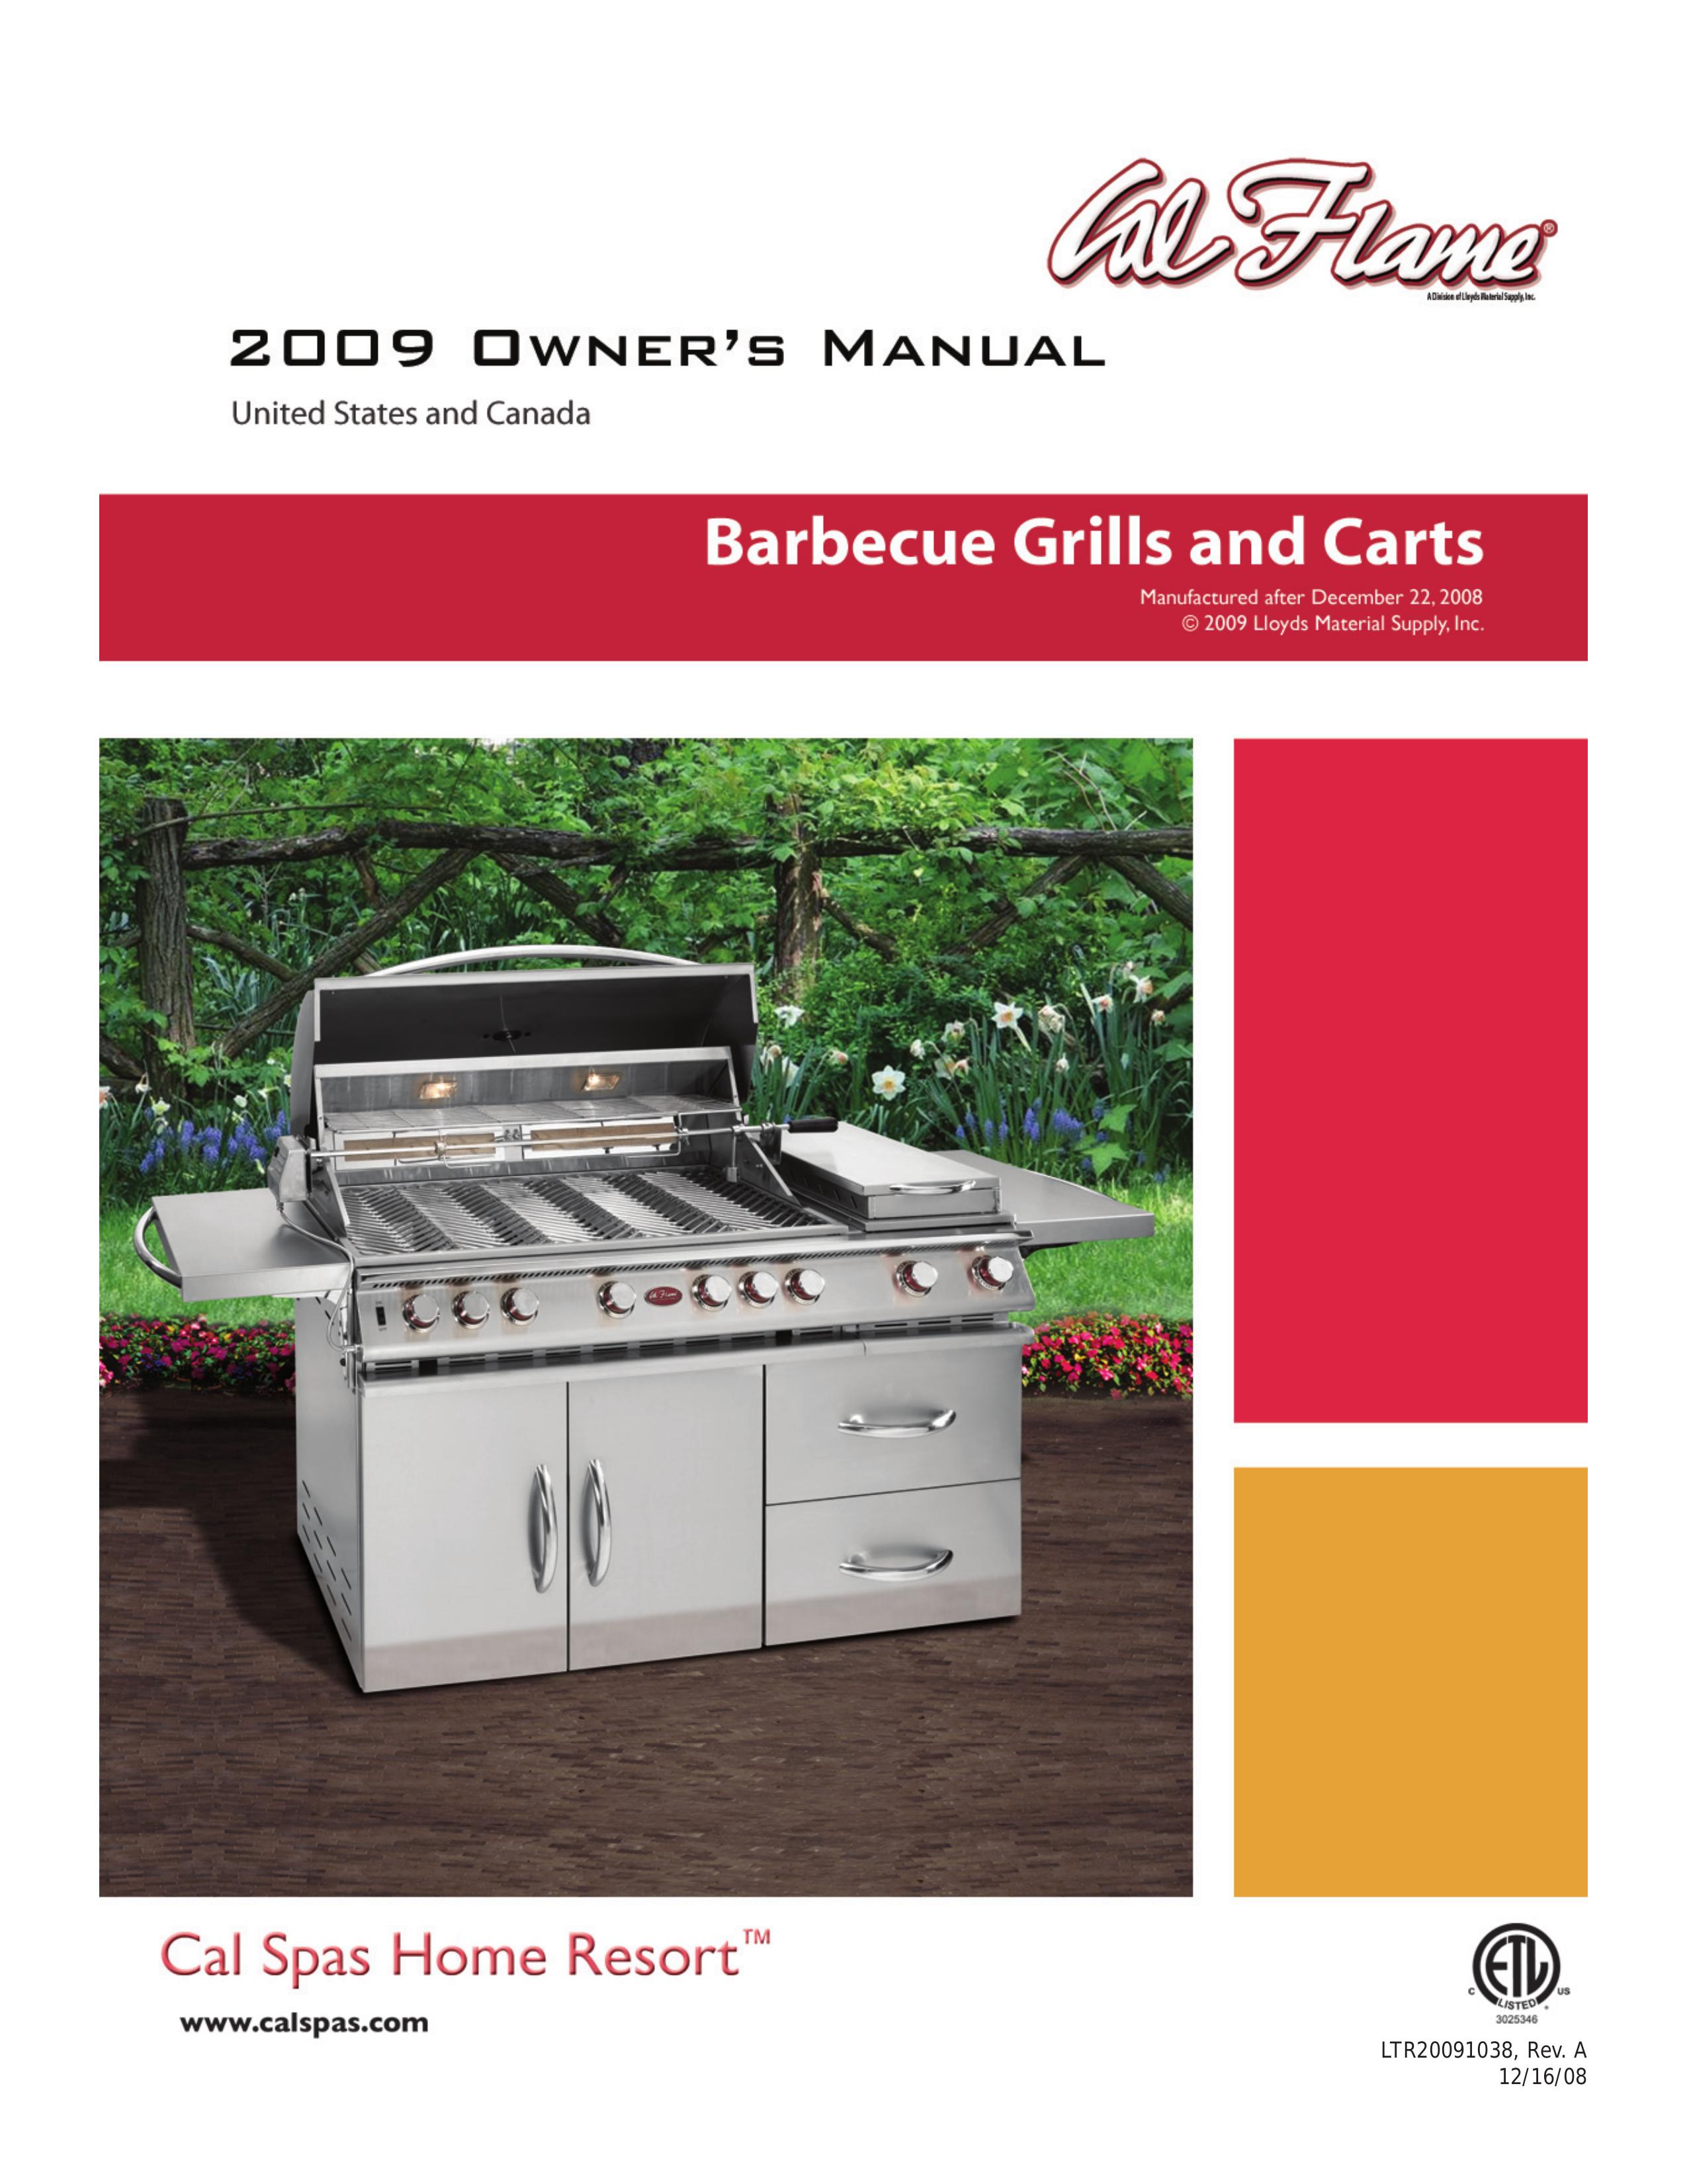 Cal Flame Barbecue Grills & Carts Gas Grill User Manual